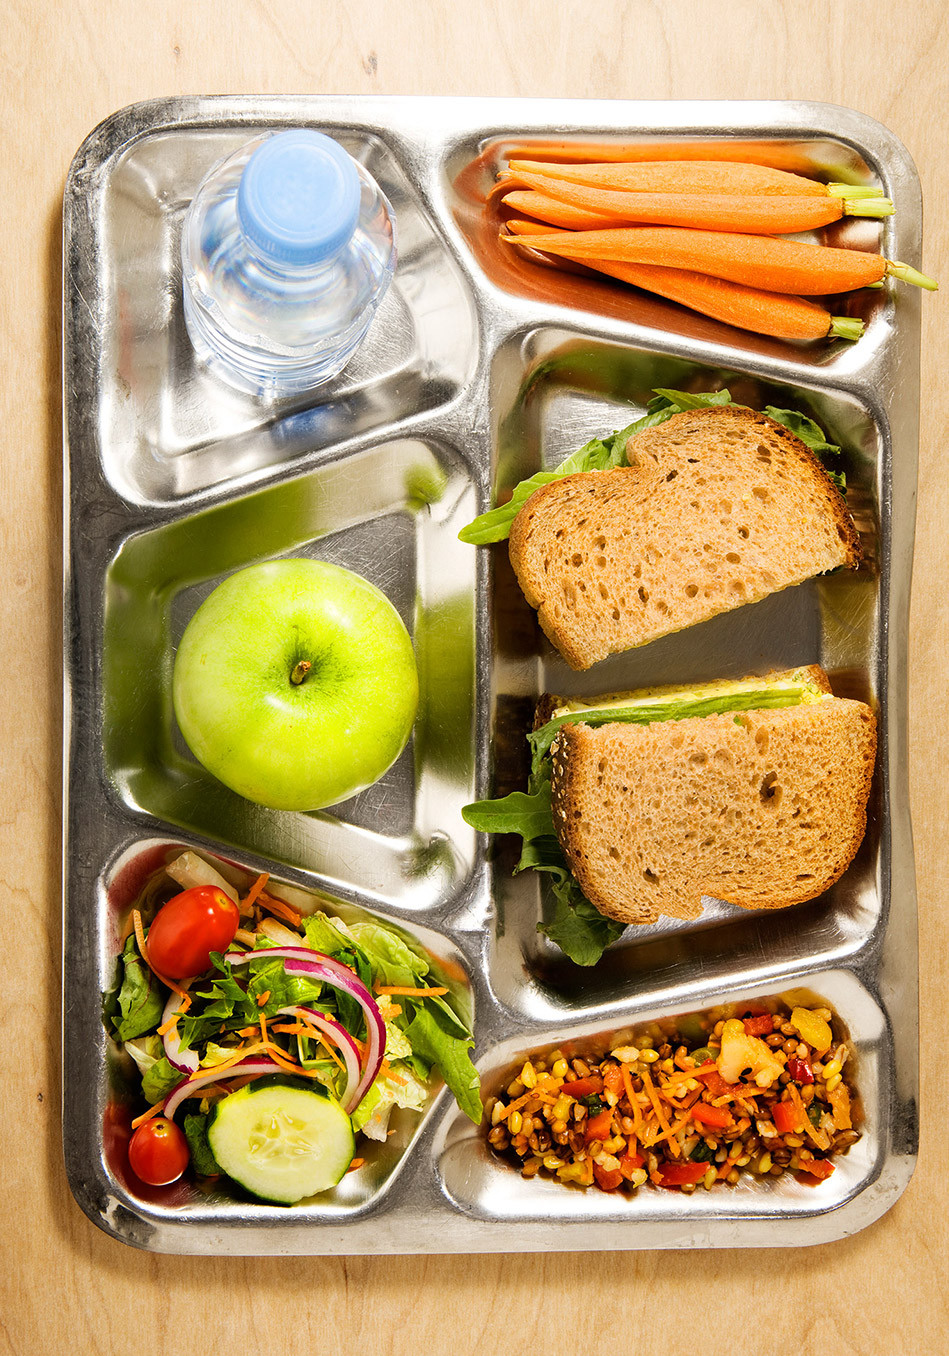 Pack Healthy School Lunches
 How to Pack a Lunch – Healthy Lunch Ideas